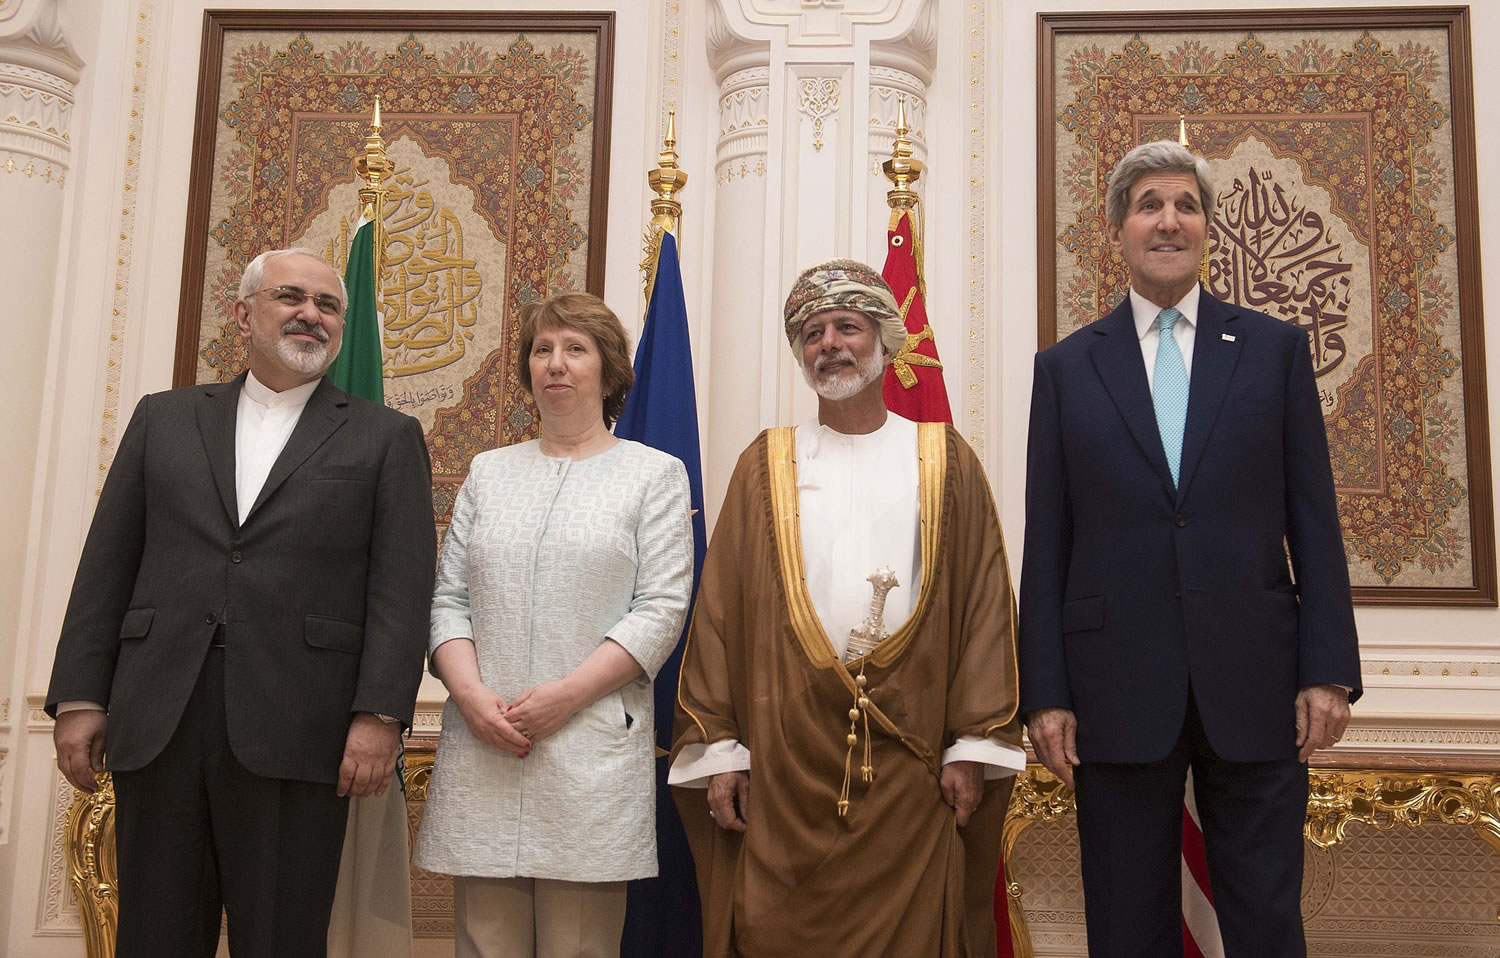 Posing for a photo are, from left, Iranian Foreign Minister Javad Zarif, European Union adviser Catherine Ashton, Omani Minister Responsible for Foreign Affairs Yussef bin Alawi and U.S.